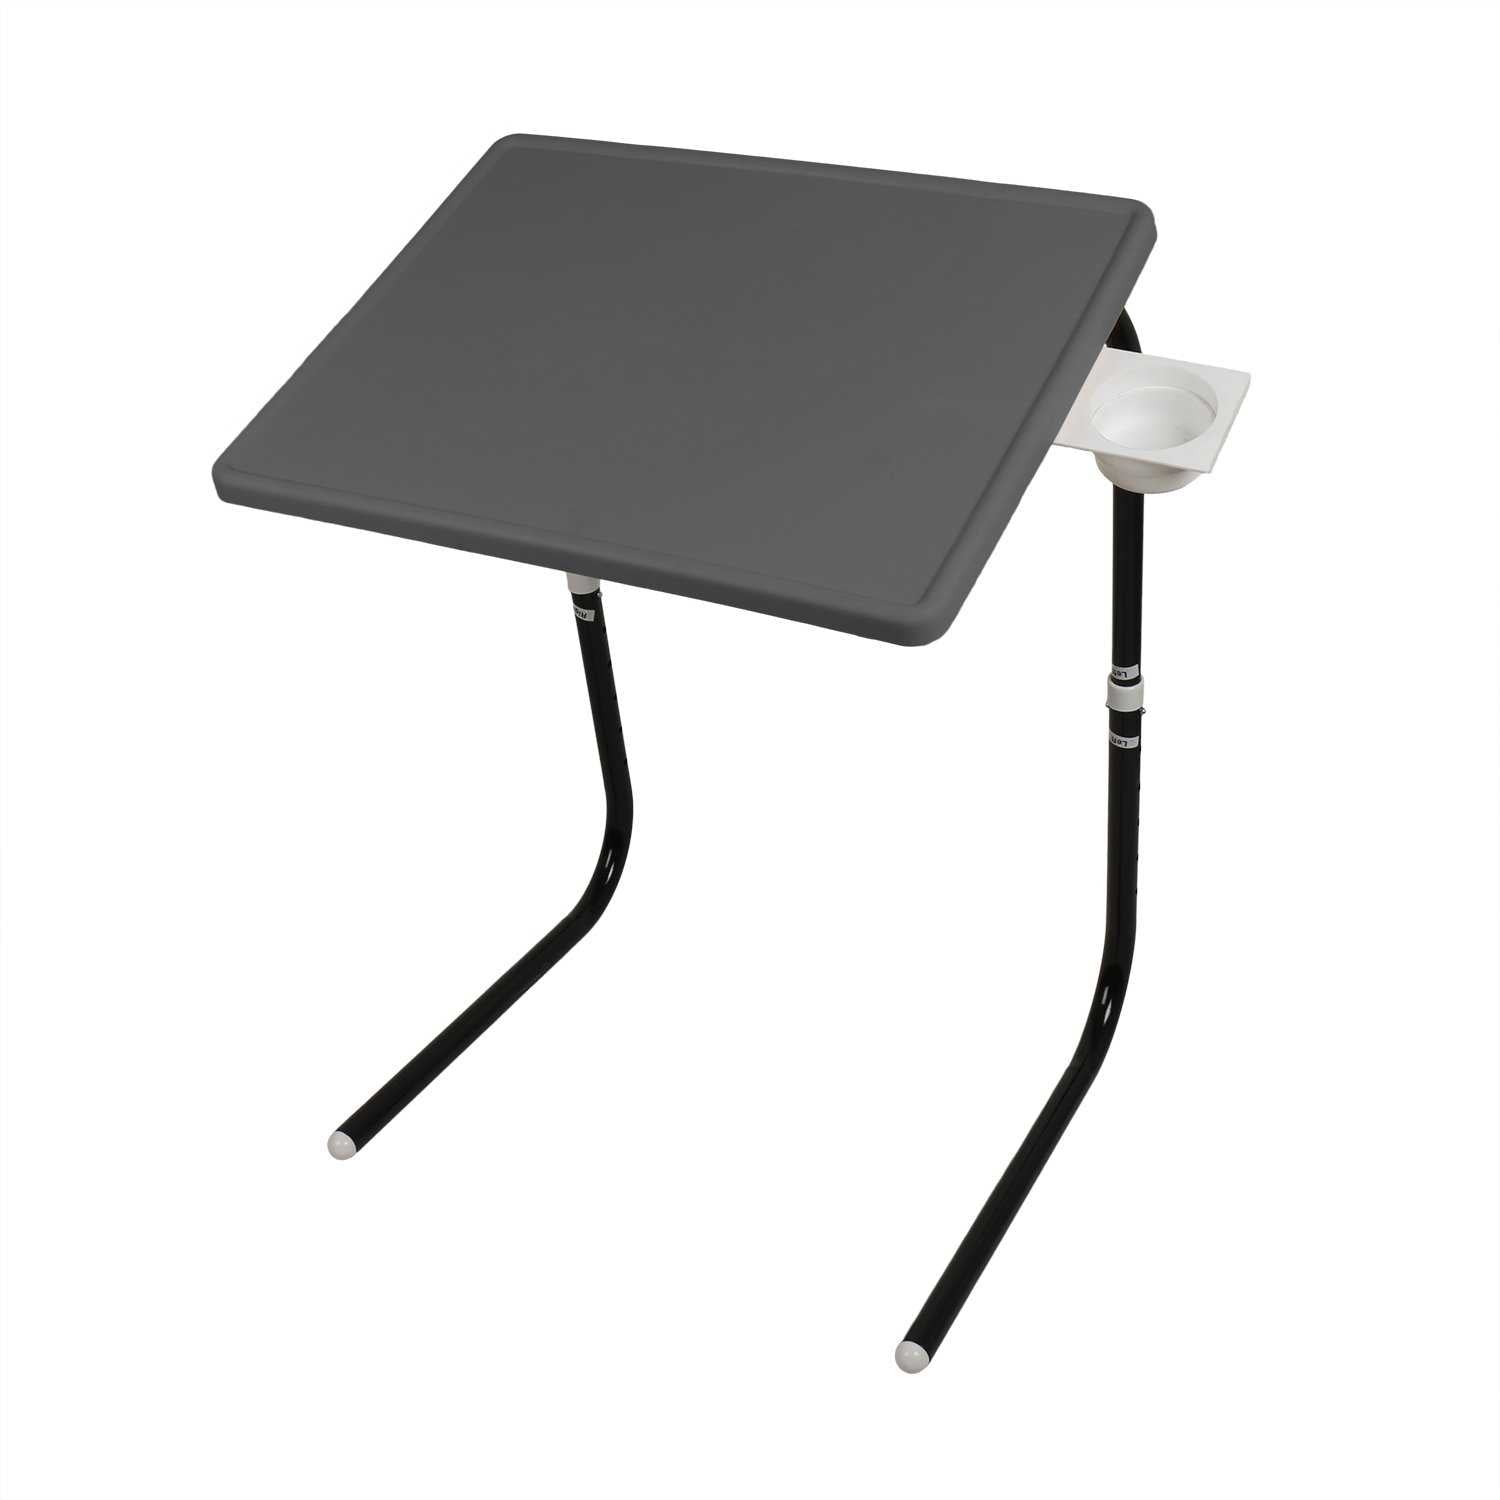 Table mate with grey finishing | Wudore